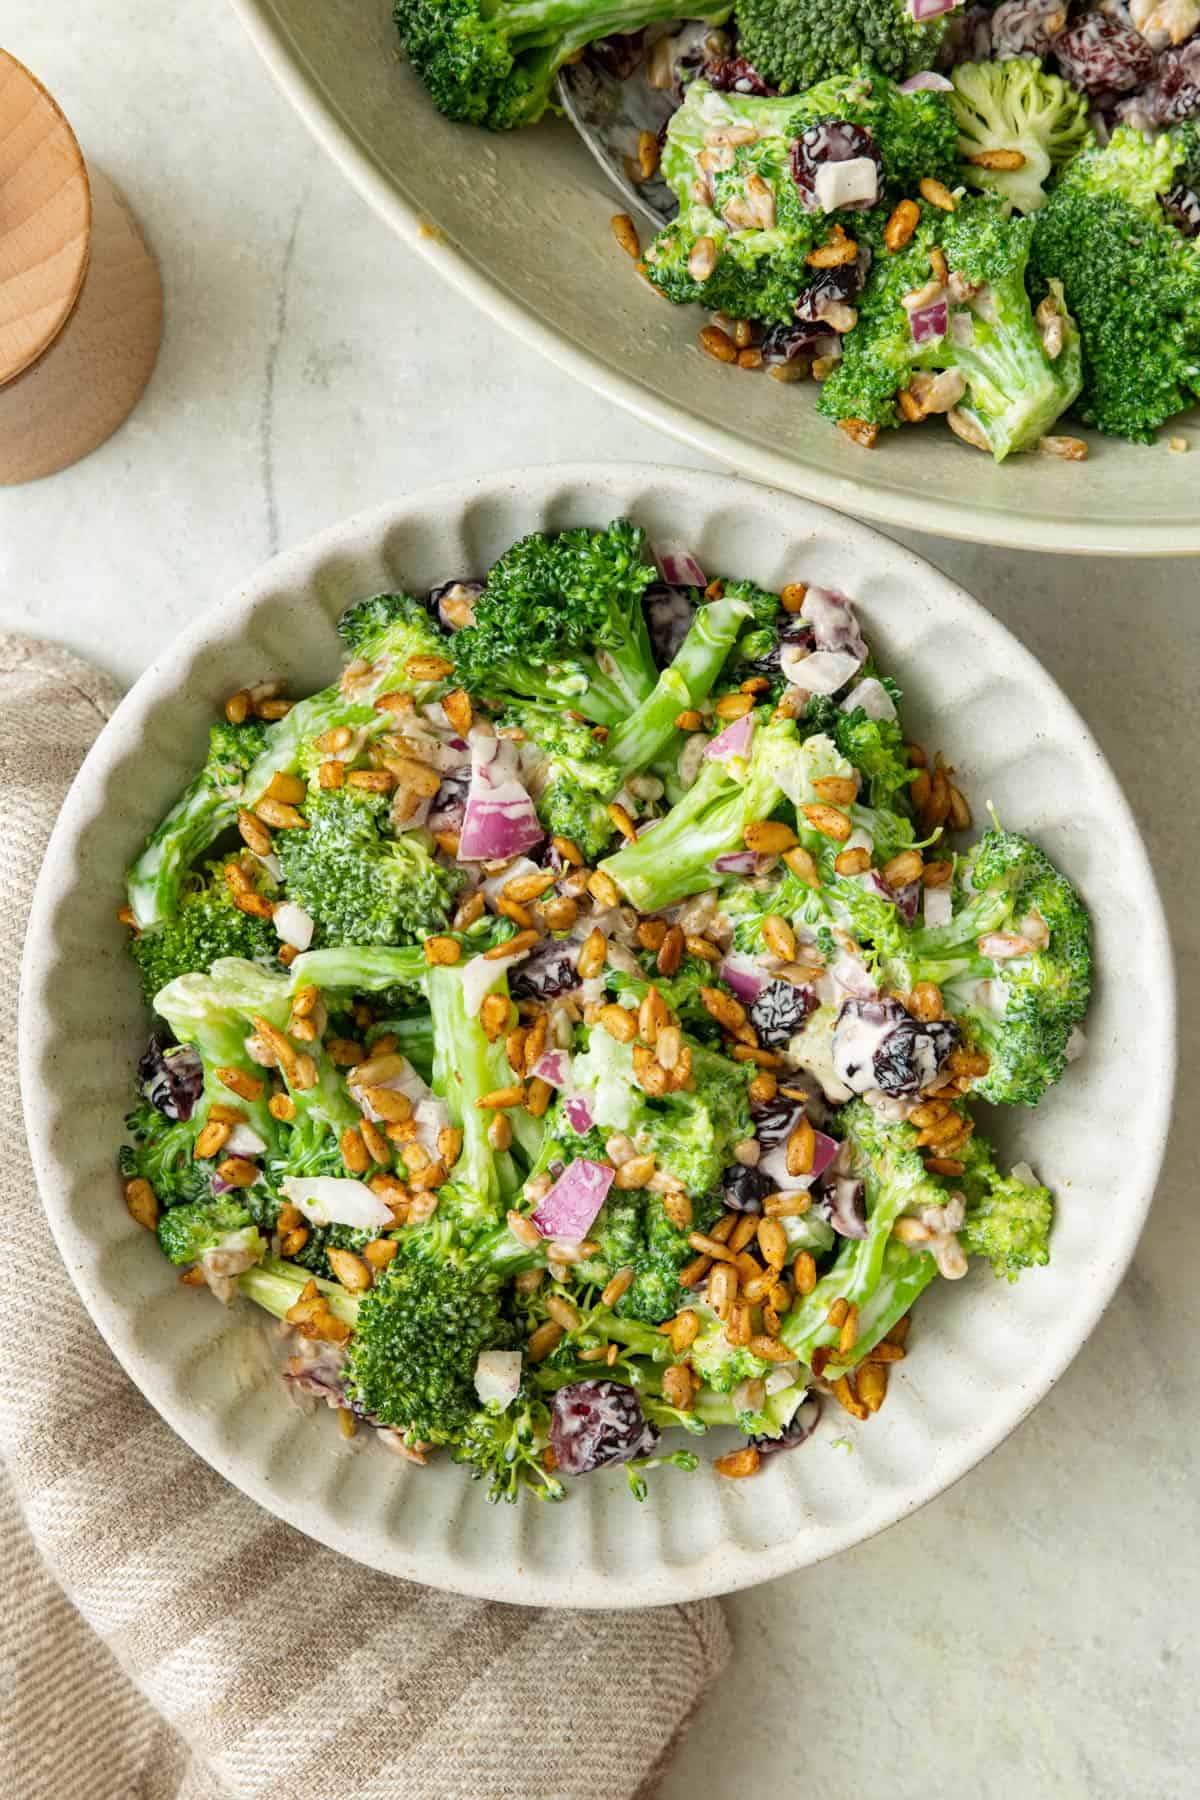 Broccoli salad in a serving bowl next to large salad bowl with extra toasted nuts on top.